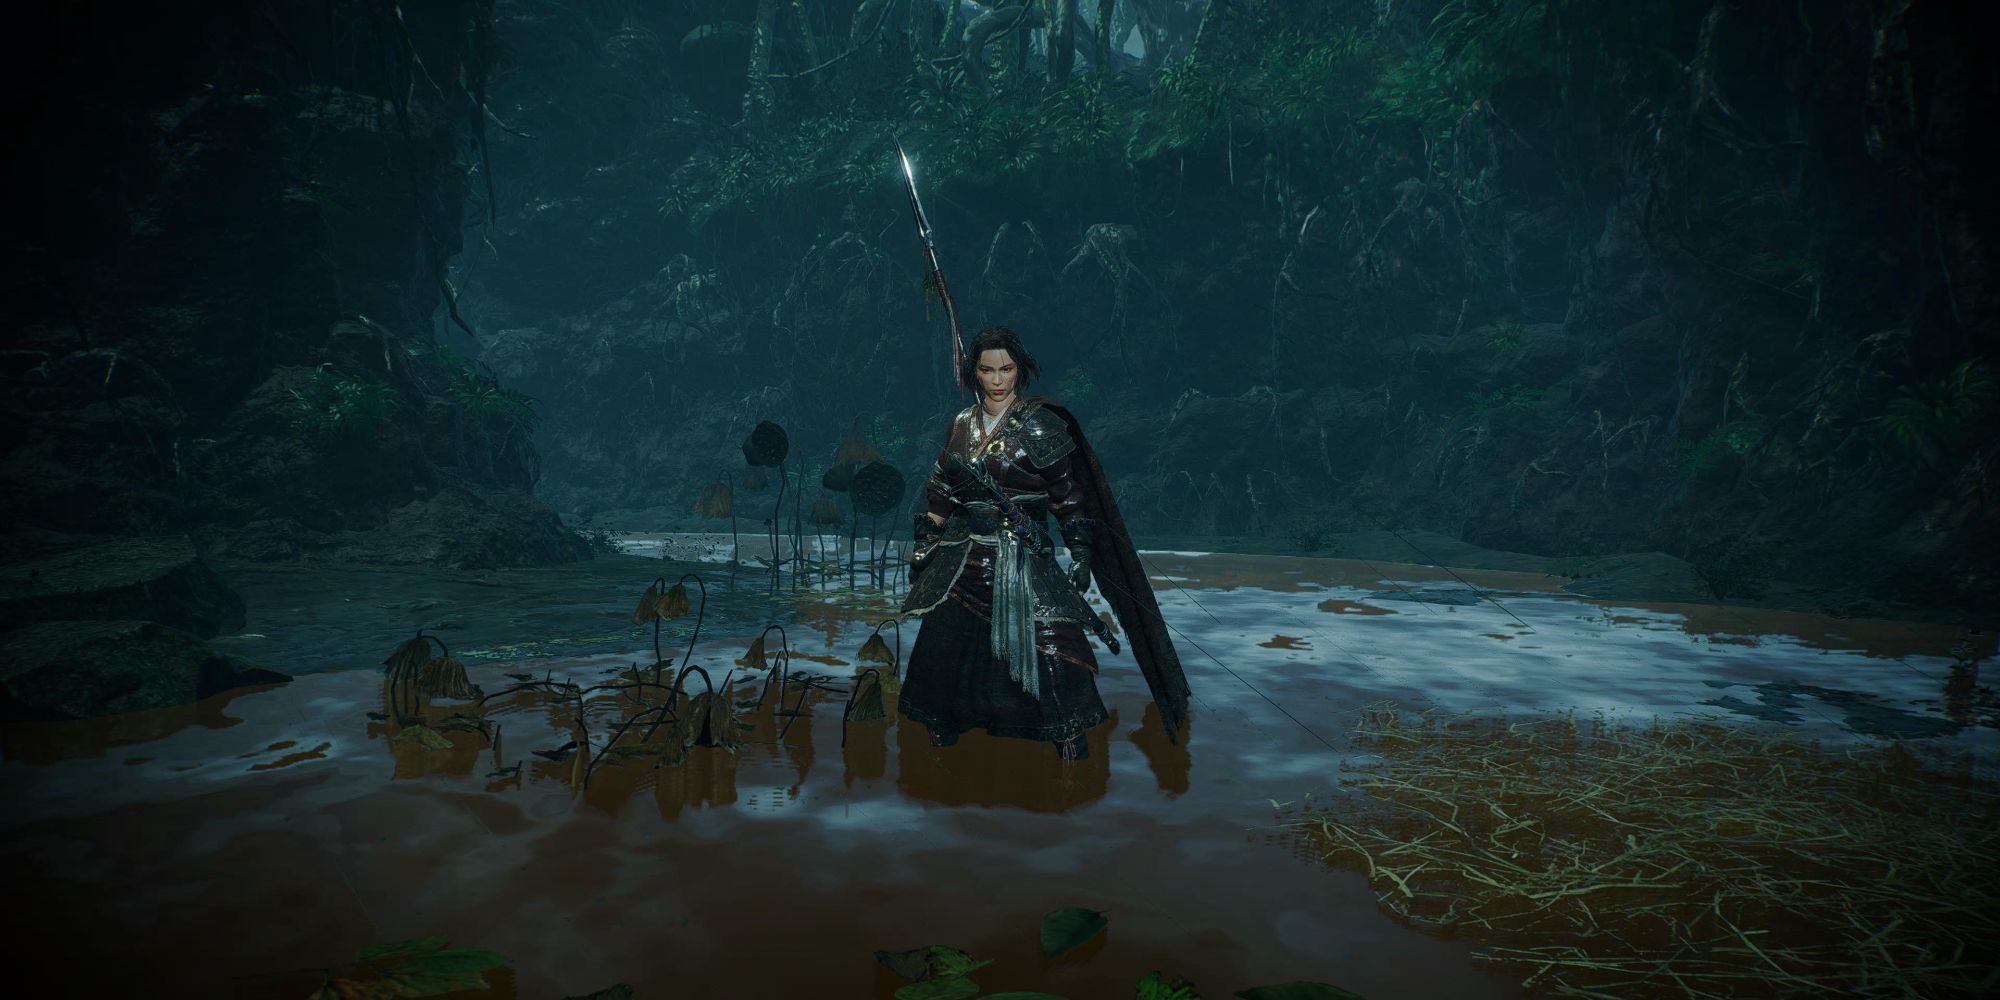 main (1)Wo Long: Fallen Dynasty - our characer stands in water as it rains around them.